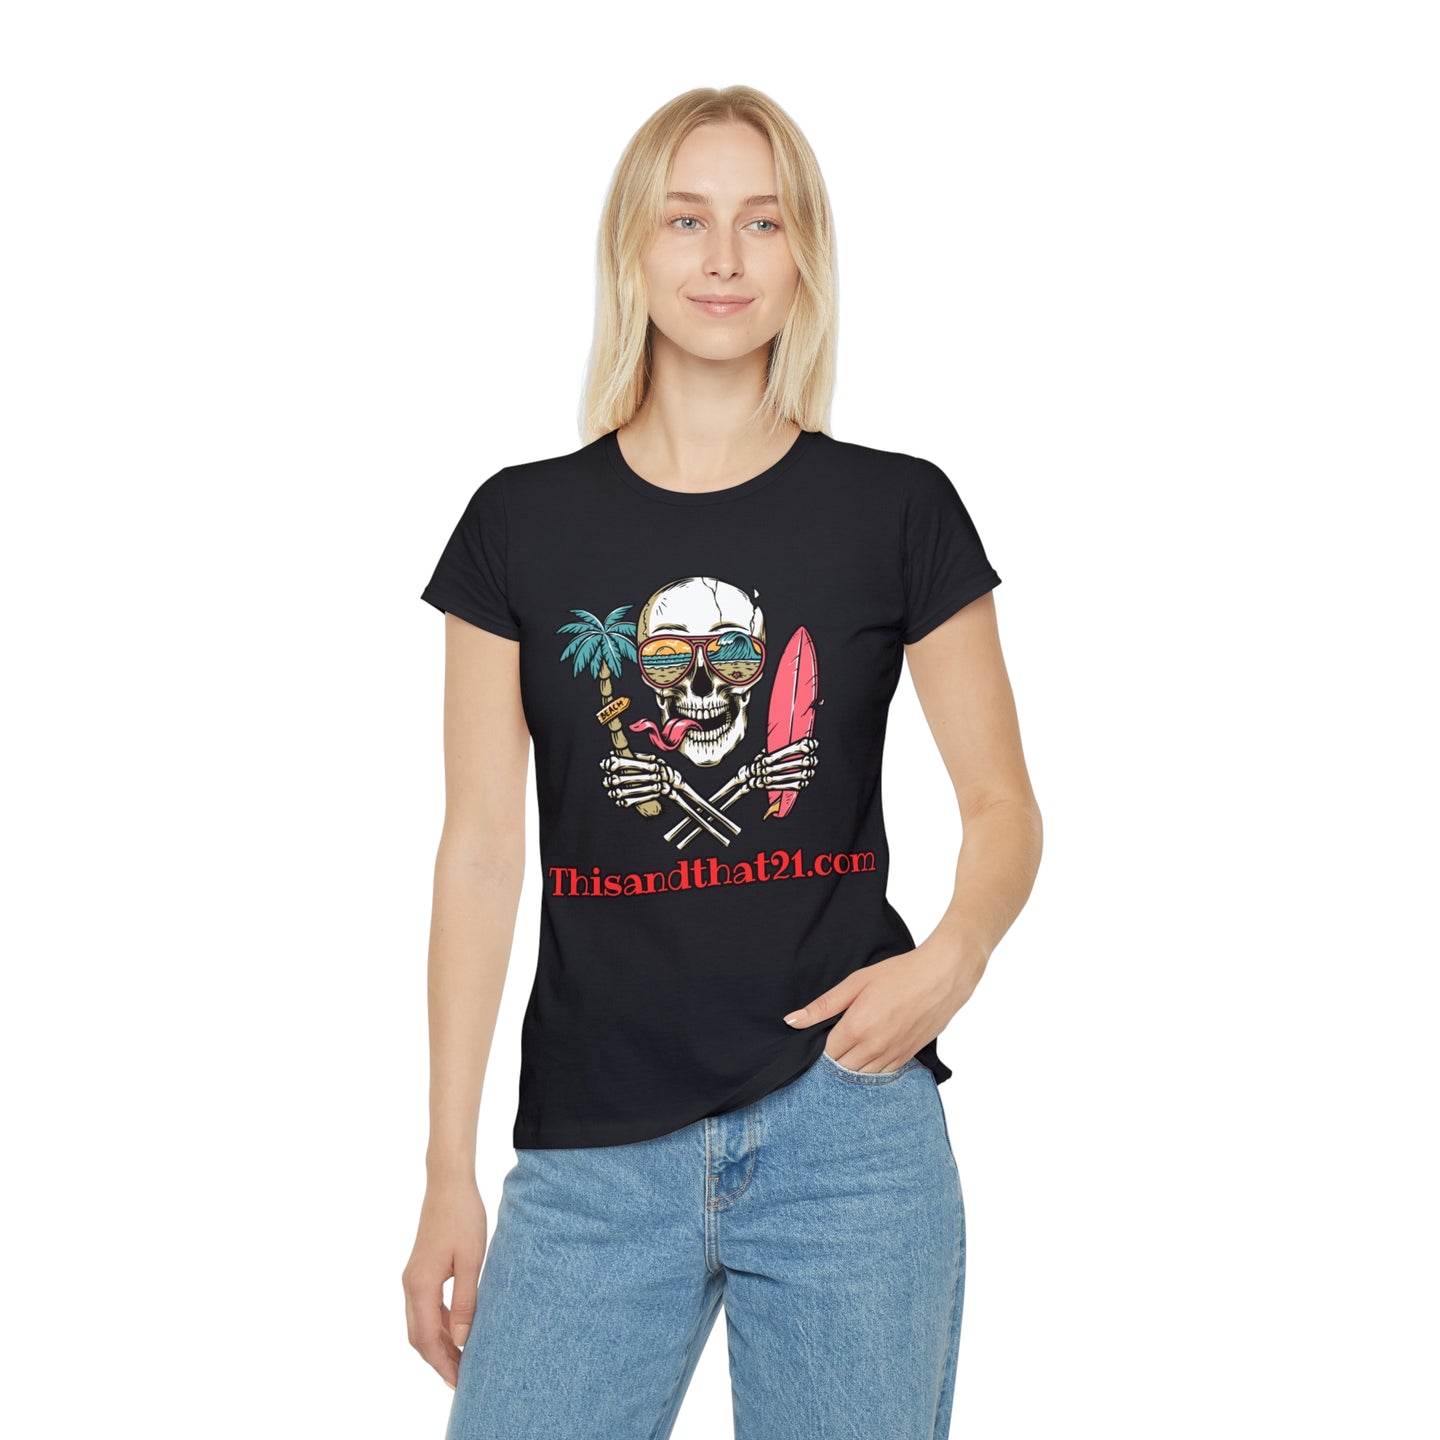 T-Shirt Donna Thisandthat21 Style